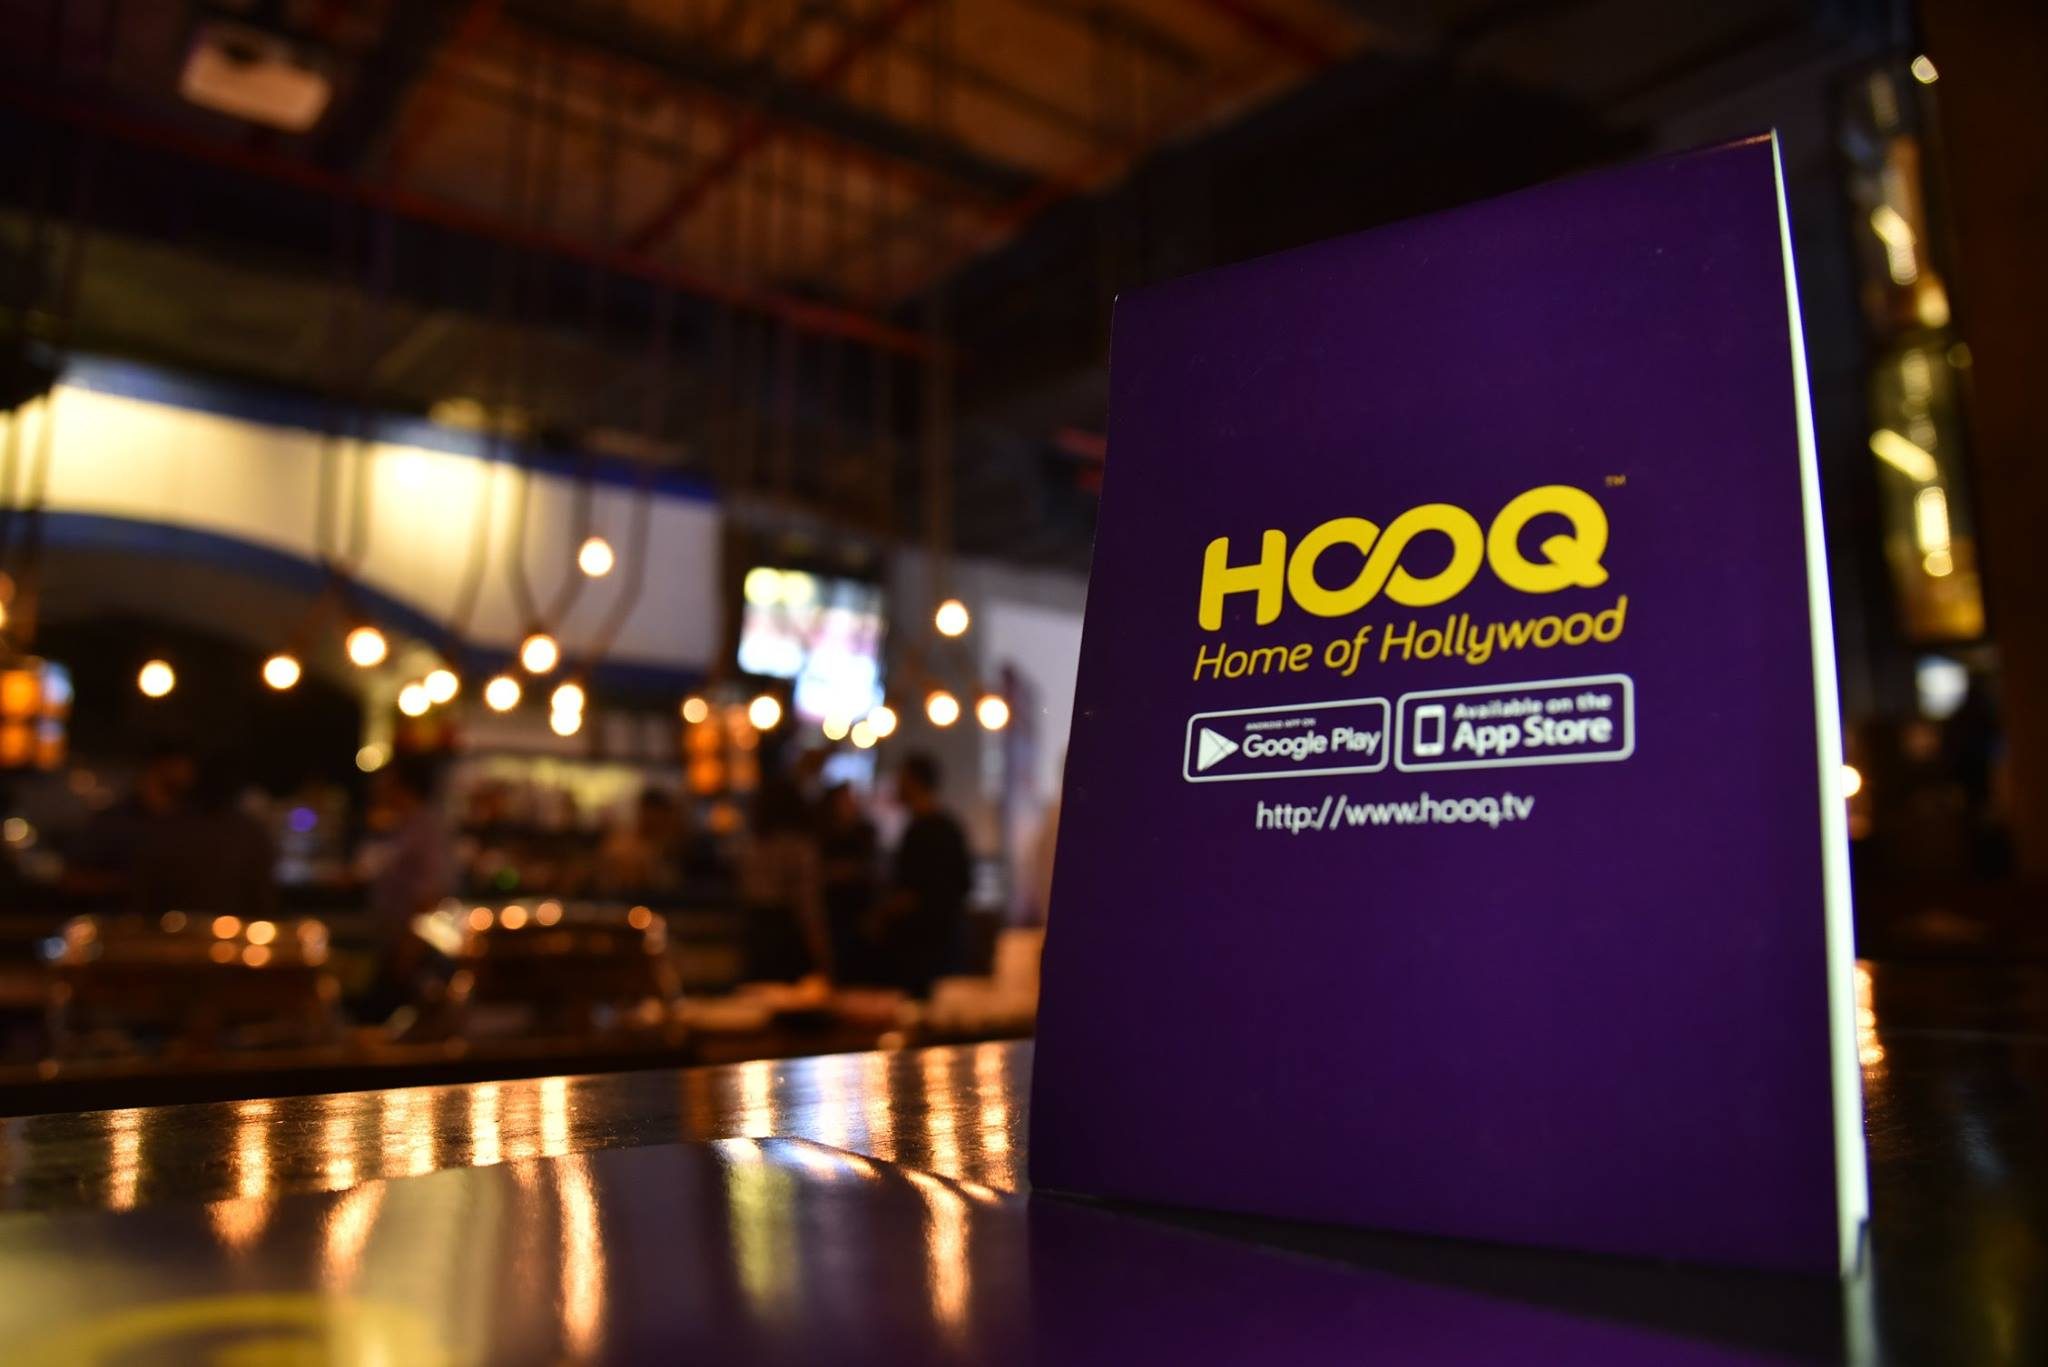 Singtel-backed video streaming service HOOQ files for liquidation